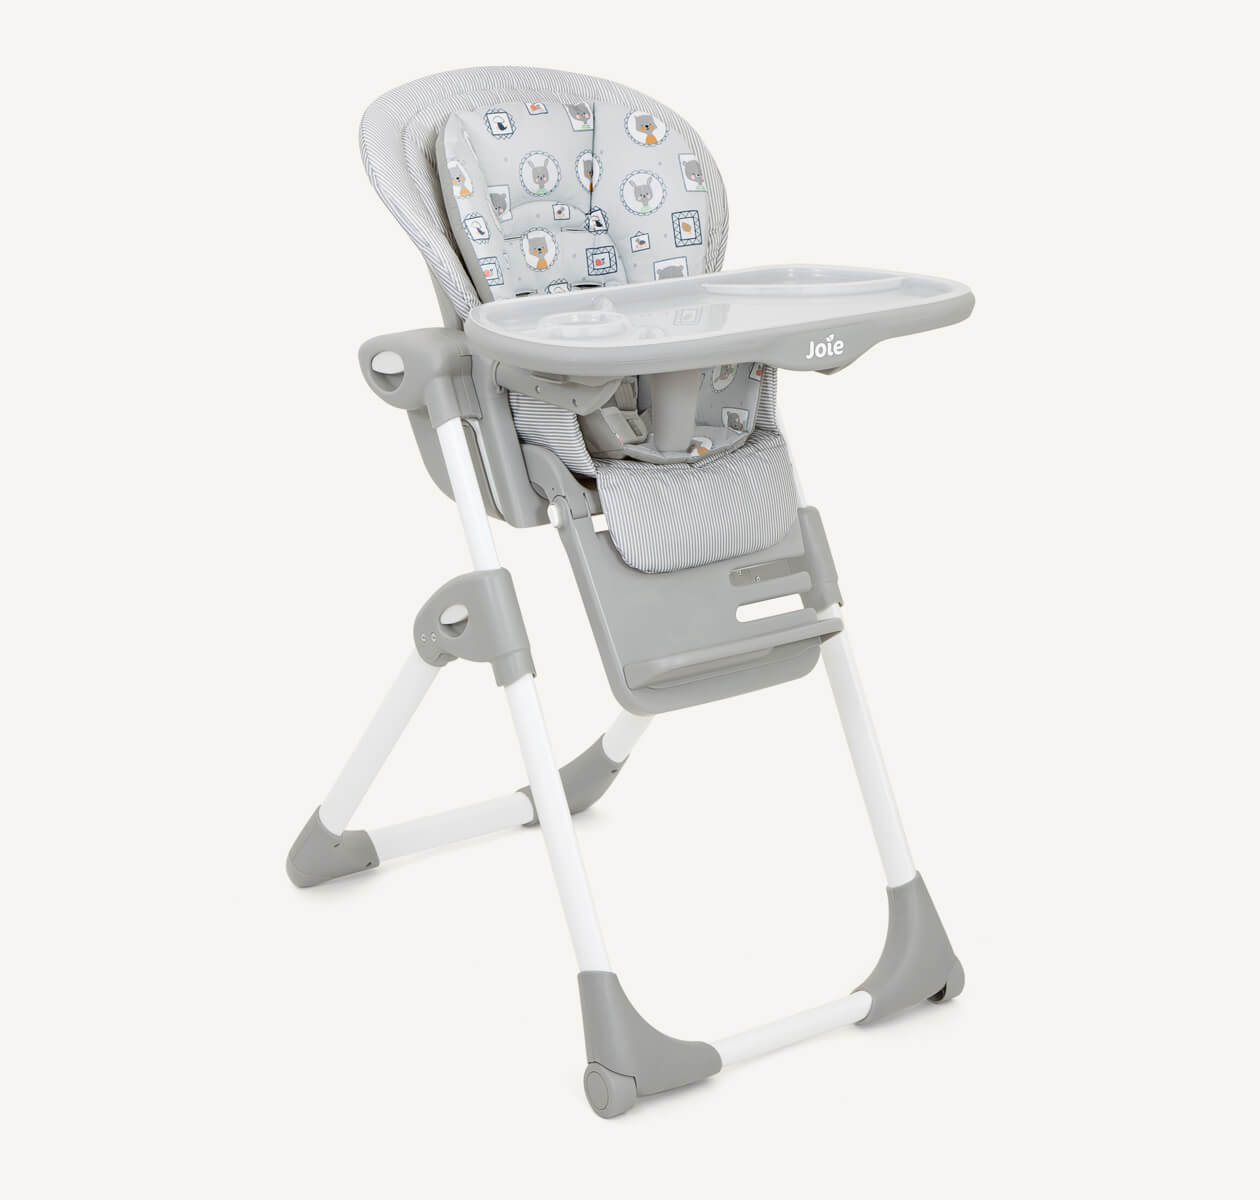 The Joie highchair mimzy 2in1 in a multi-color print featuring various animal characters in picture frame portraits from a right angle. 